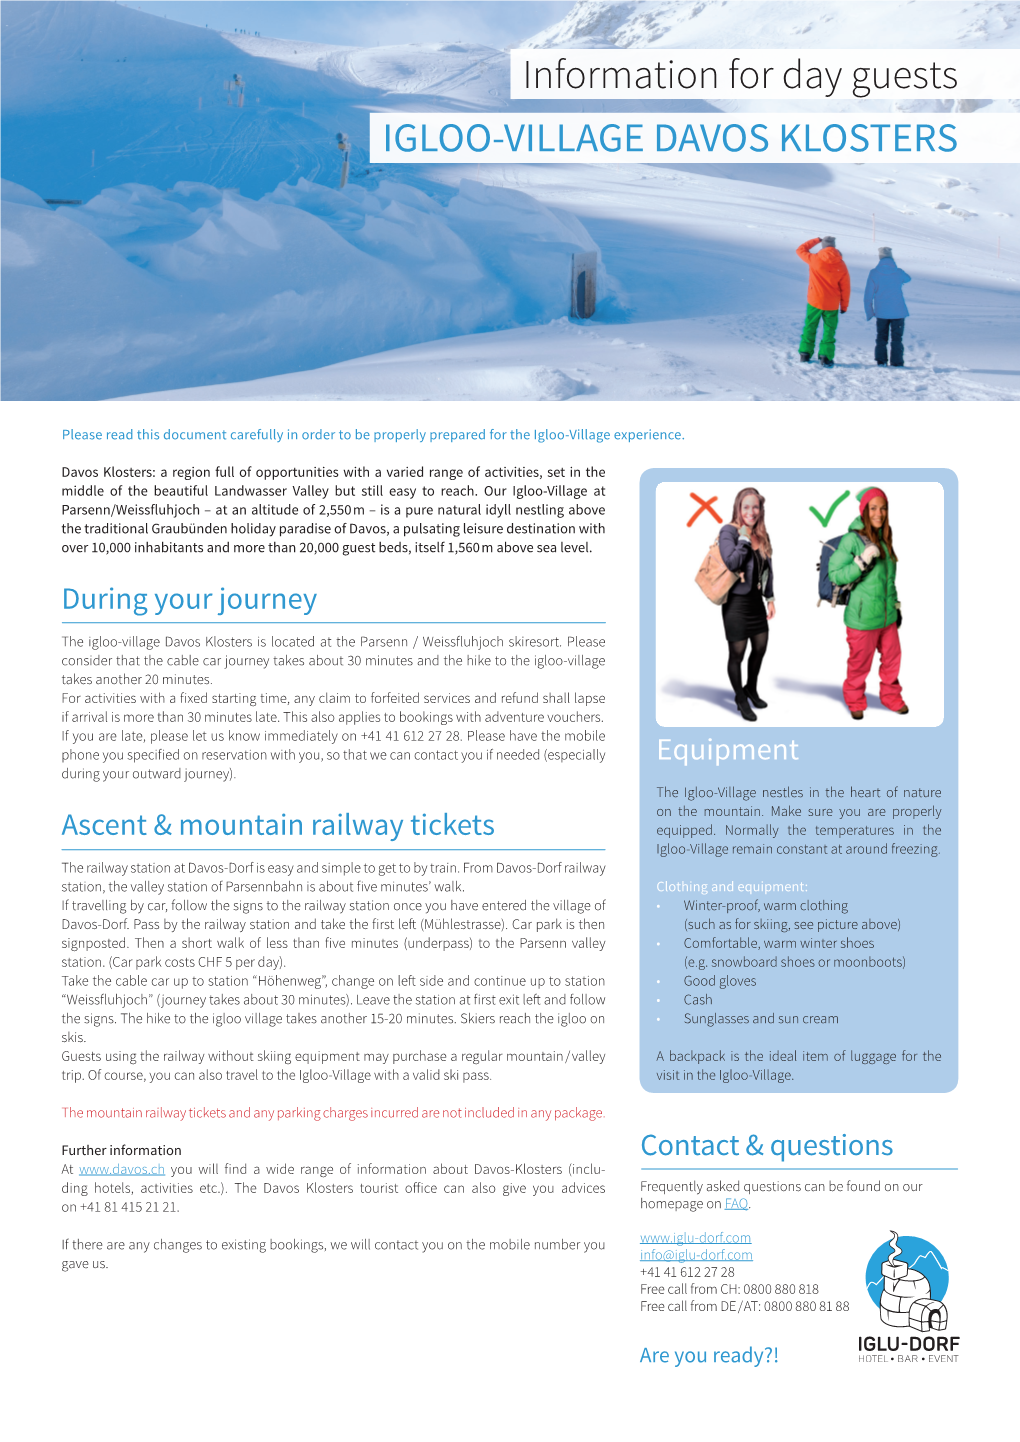 Information for Day Guests Igloo-Village Davos Klosters